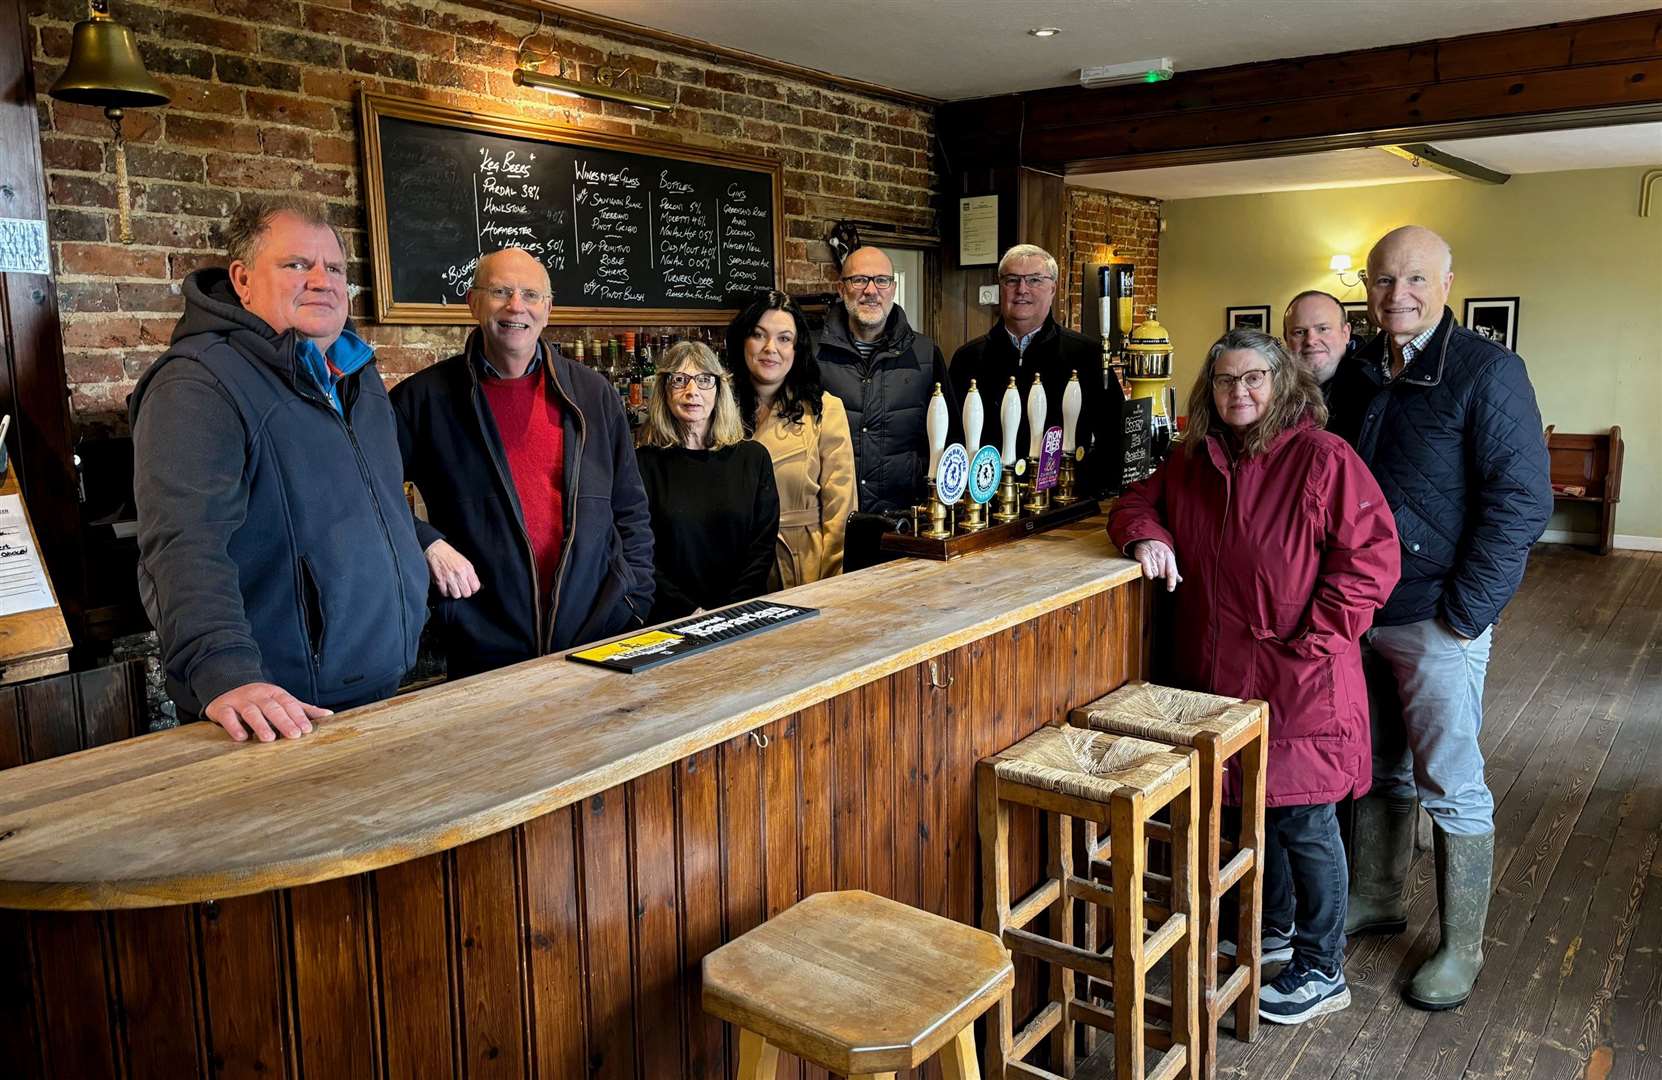 The steering committee: behind the bar, from left, Warren Gilbert, Jonathan Pearce, Kim Mitchell, Kerry Goodfellow, Graham Bonner-Leney and Alan Ritchie. In front of the bar, from left, Sarah Talbutt, Robert Merrifield and Michael Wooldridge